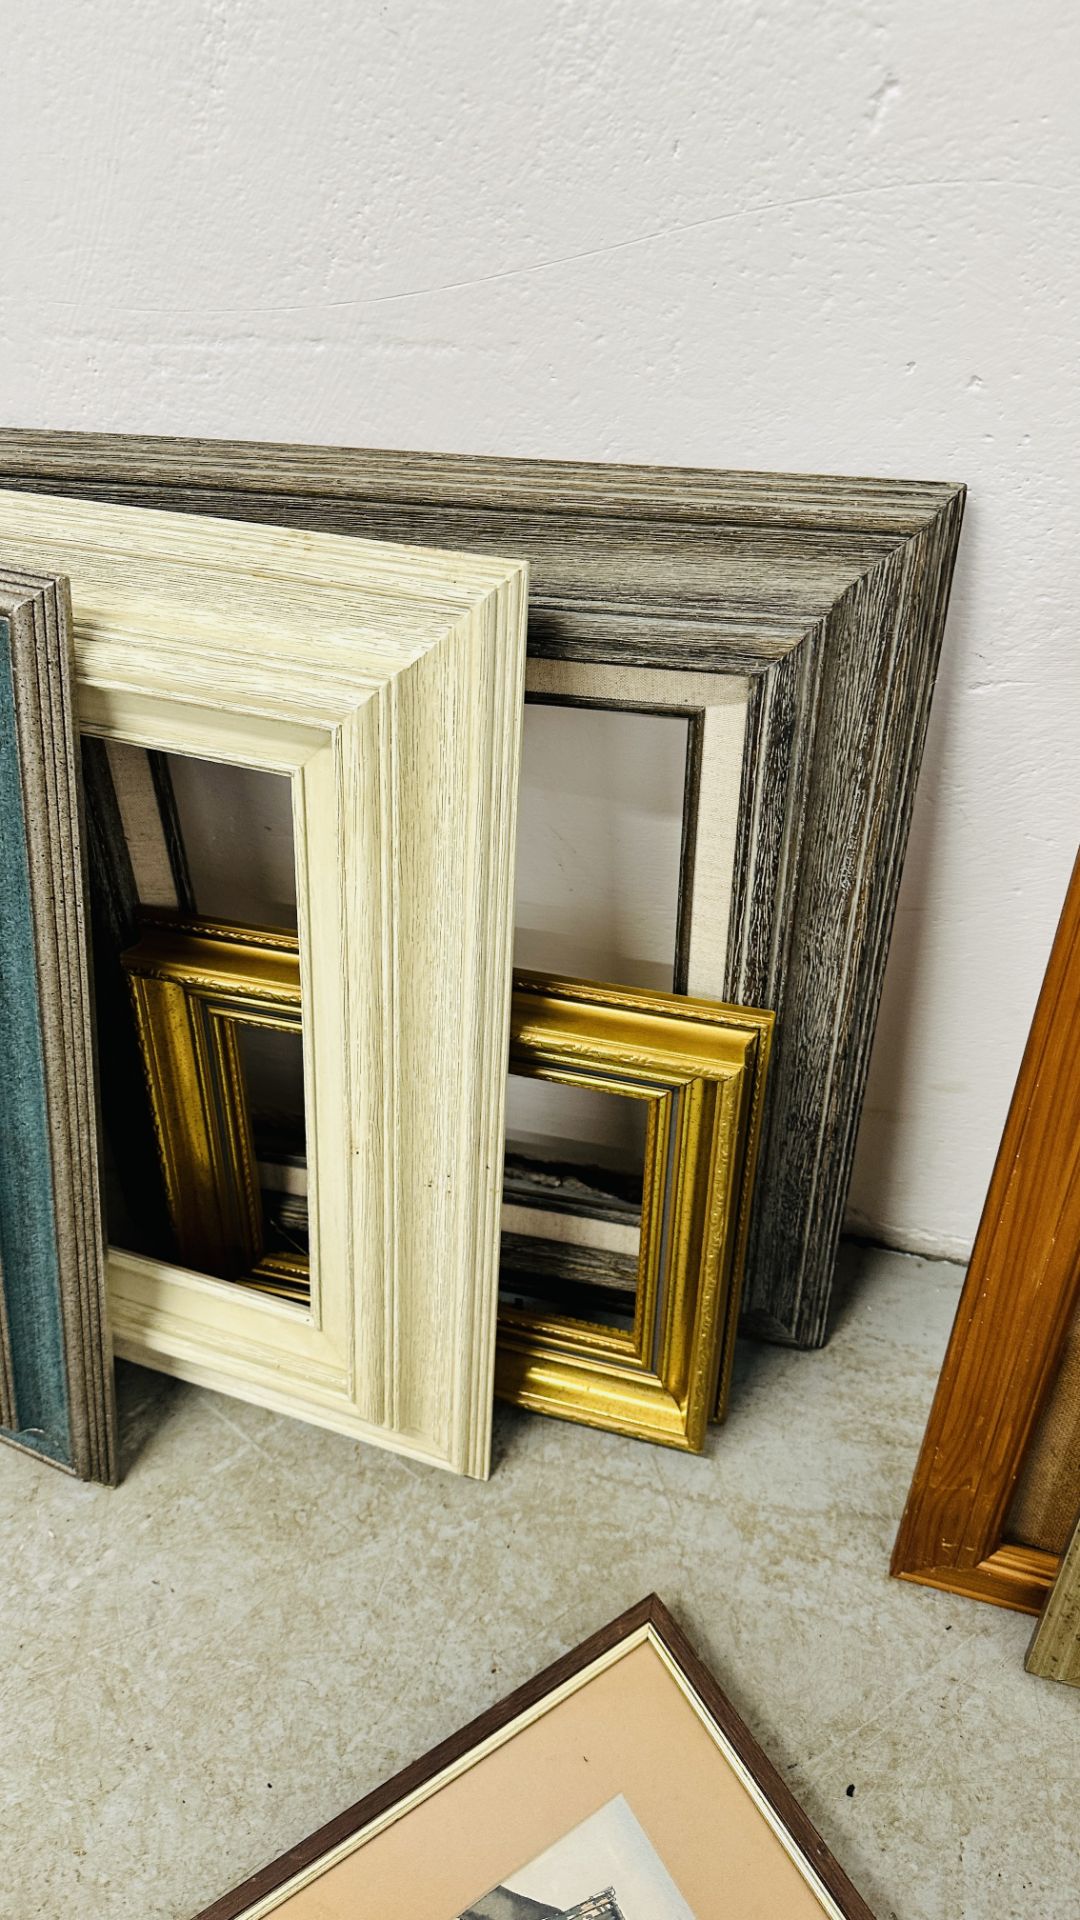 11 PICTURES AND PICTURE FRAMES AVERAGE SIZE, W 49CM X H 44CM. - Image 7 of 7